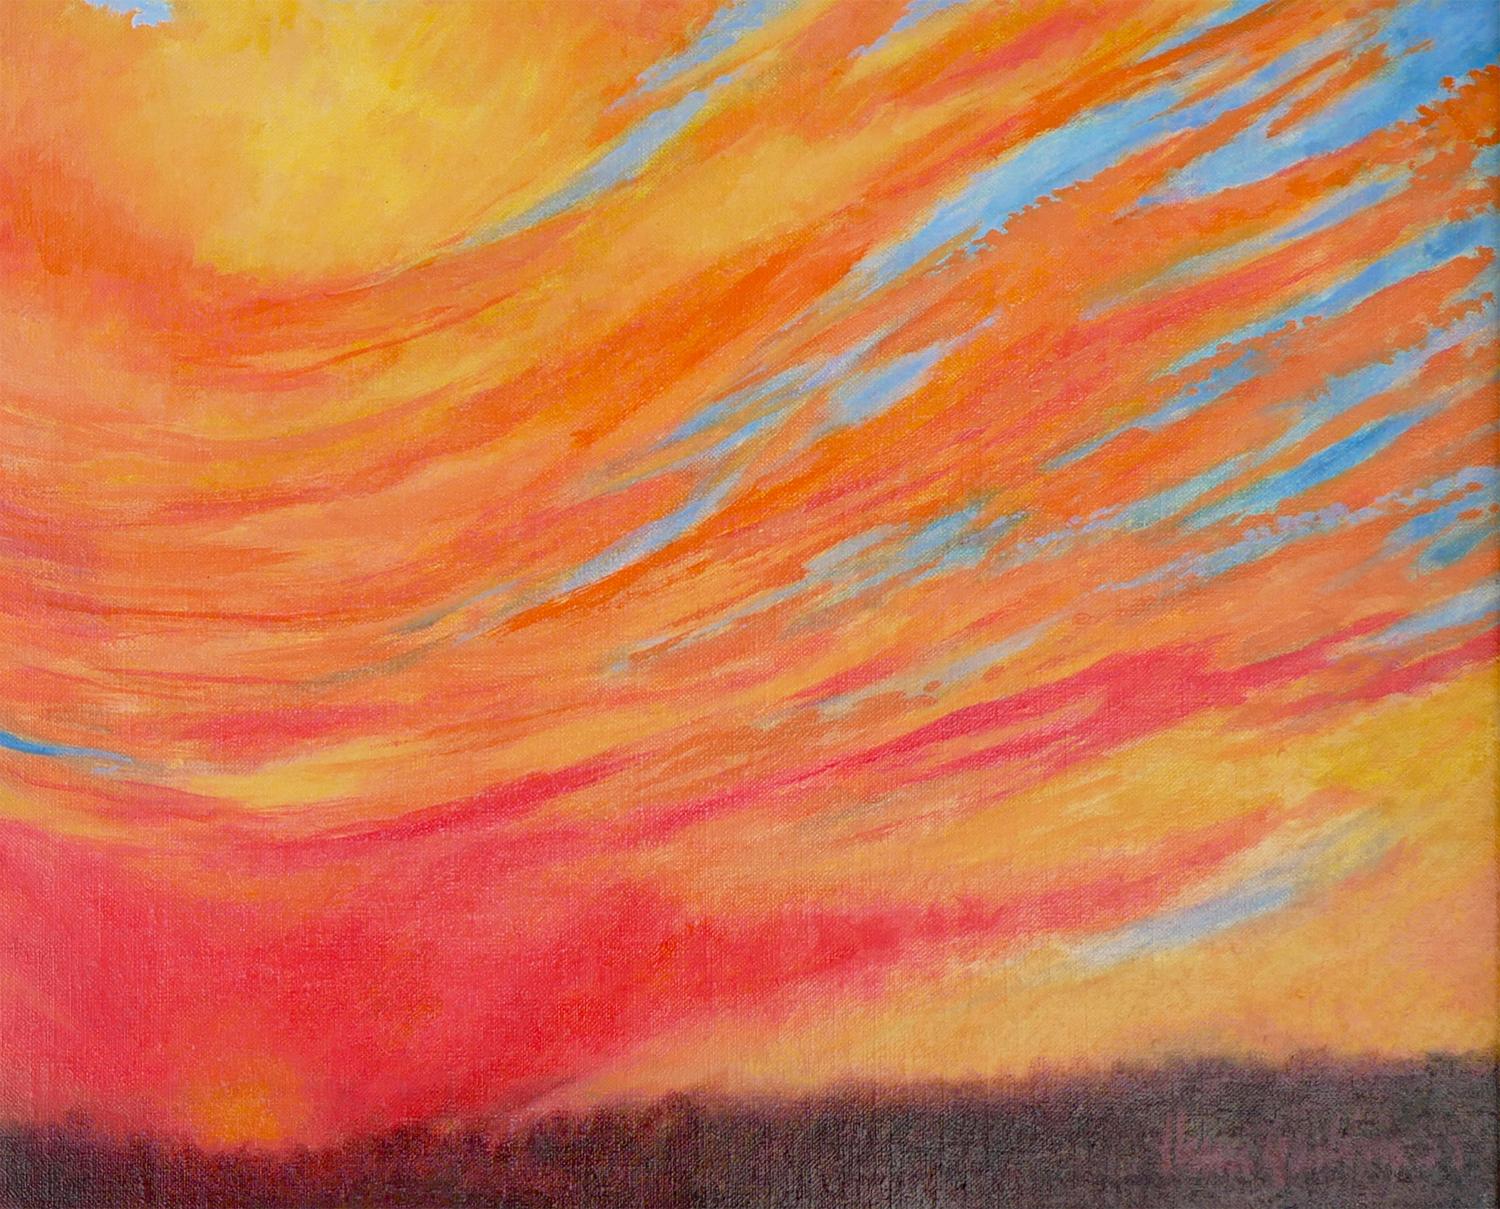 Blue, Orange, and Yellow Abstract Expressionist Sunset Landscape For Sale 5